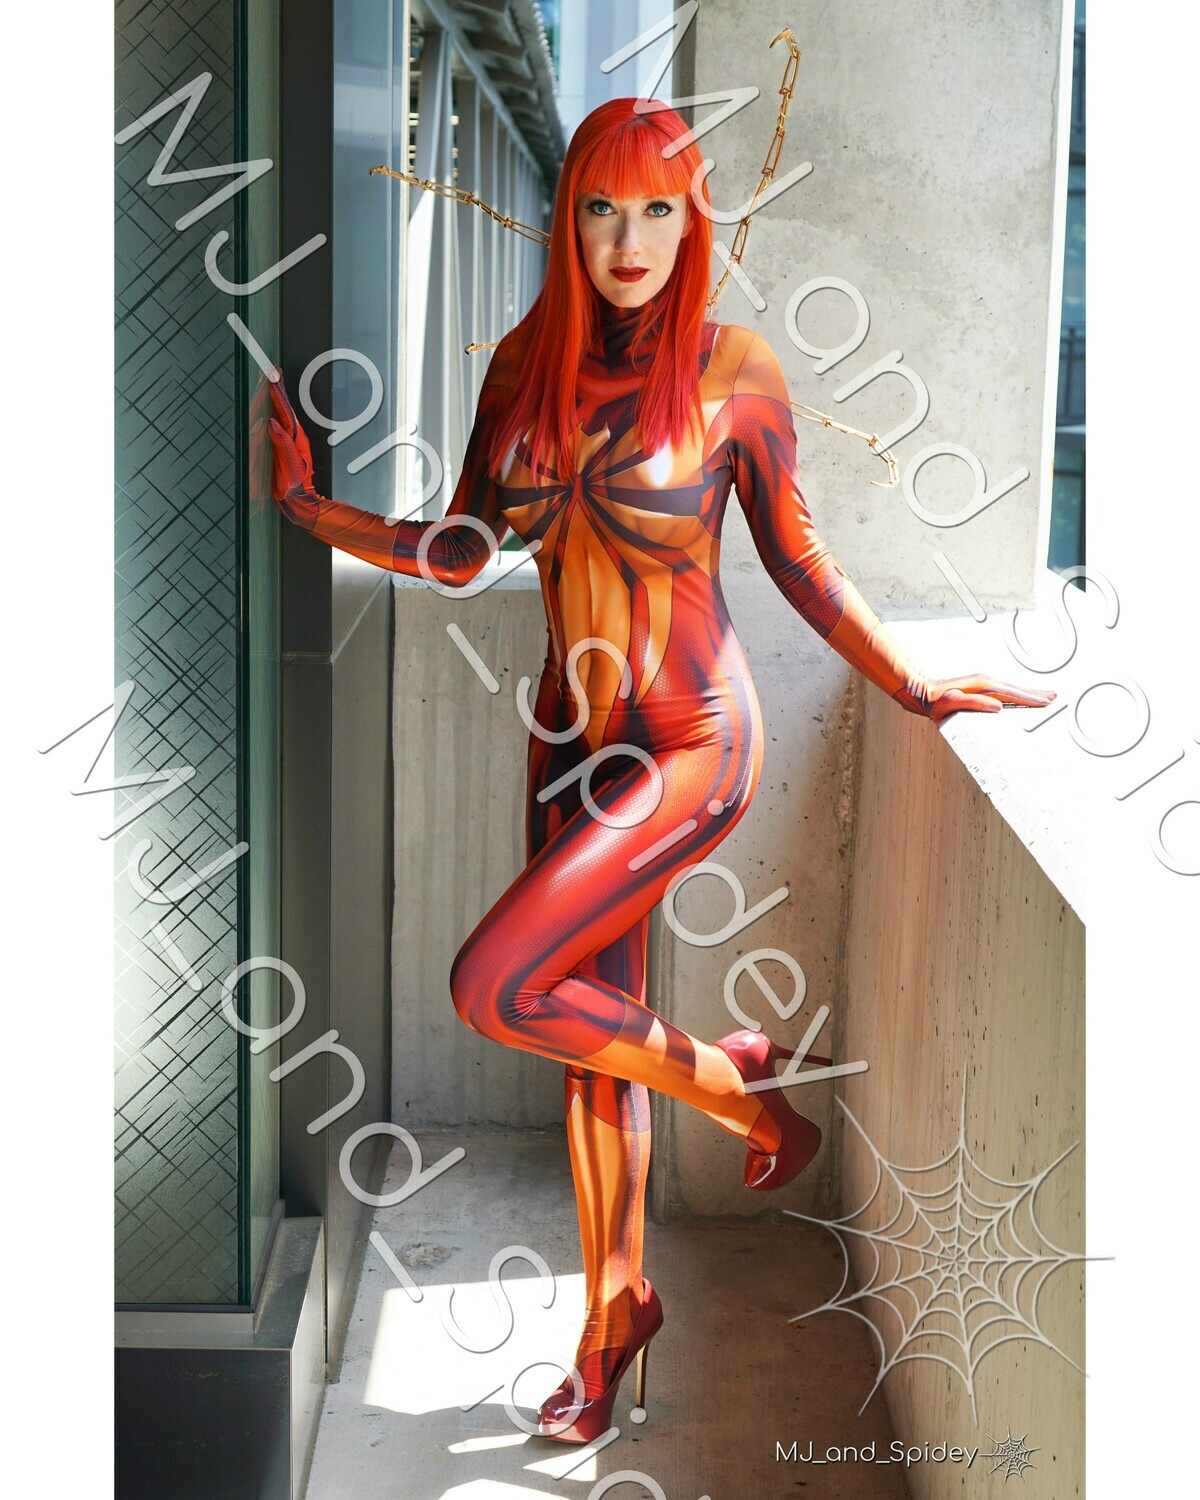 Marvel - Spider-Man - Mary Jane Watson - Iron Spider 1  -  Cosplay Print (@MJ_and_Spidey, MJ and Spidey, Comics)